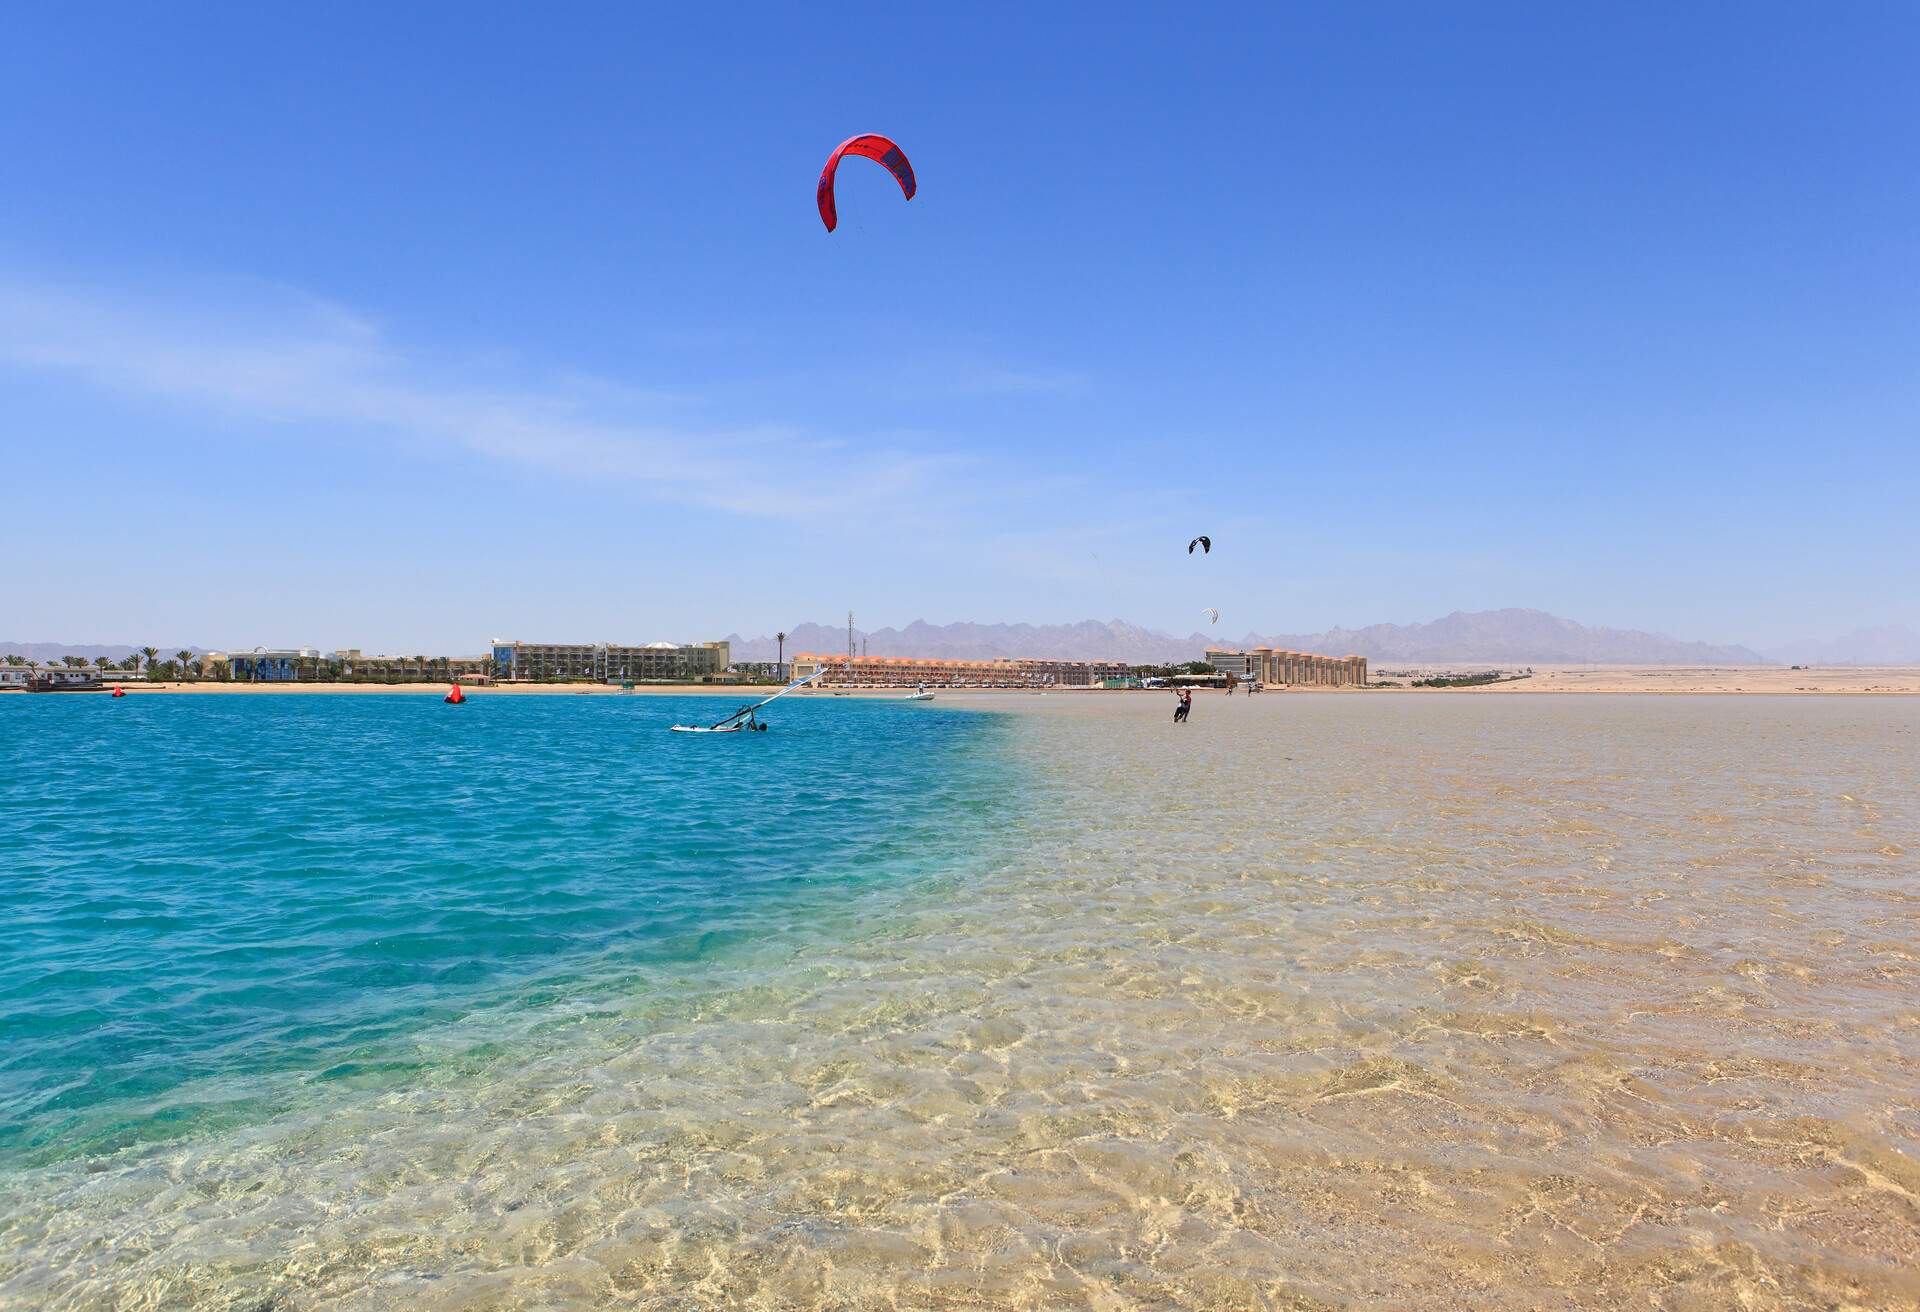 Two tourists kitesurfing on the shallow crystal clear waters of the bay with a row of buildings in the background.